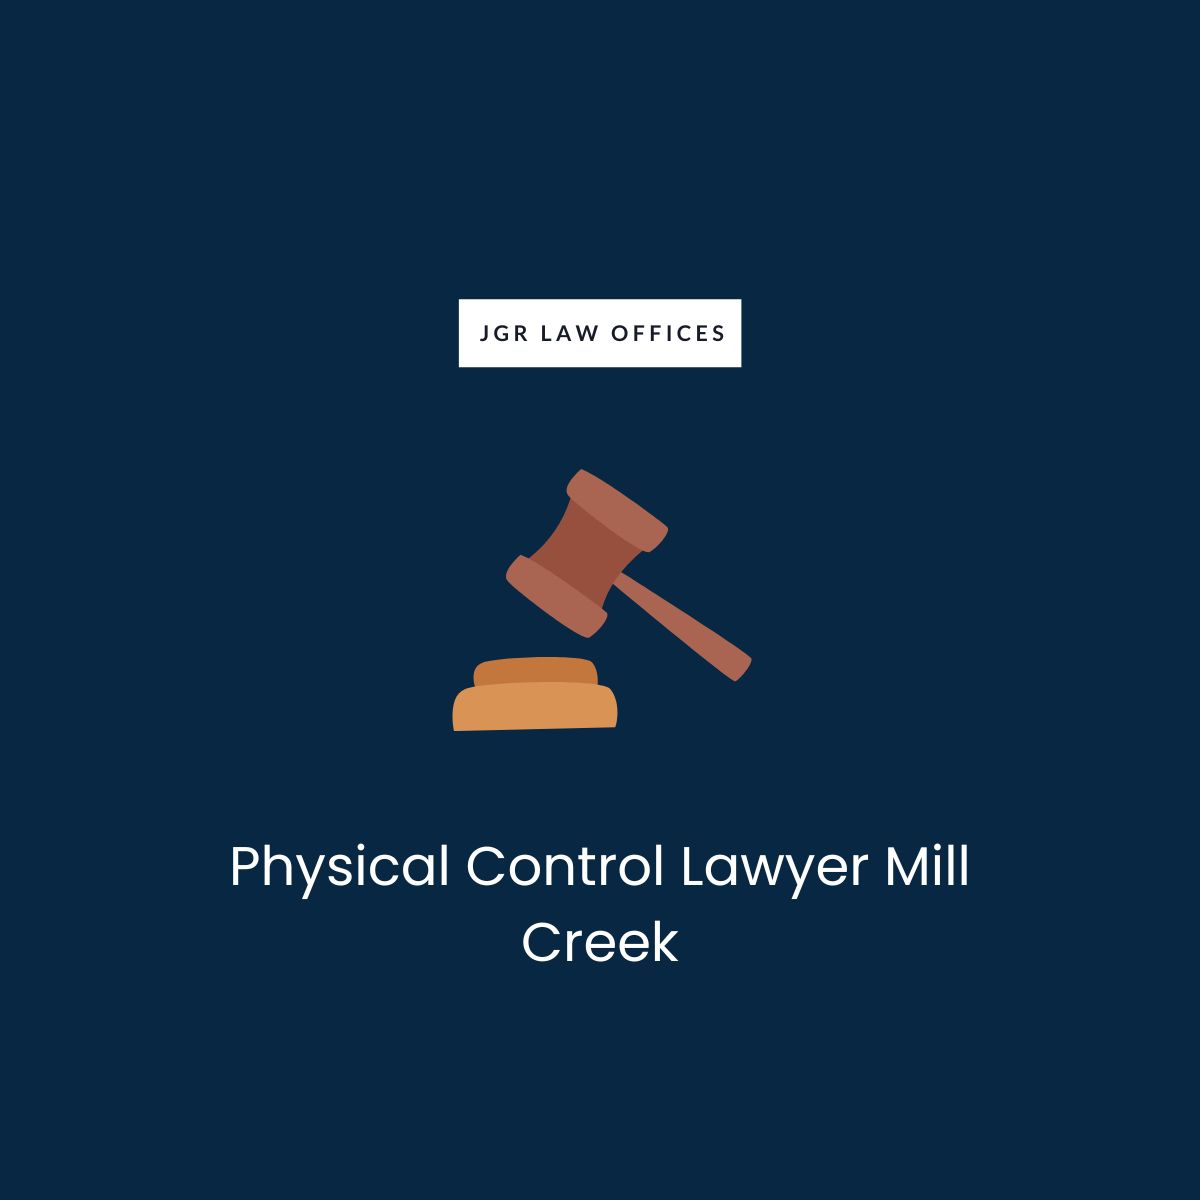 Physical Control Lawyer Mill Creek Physical Control